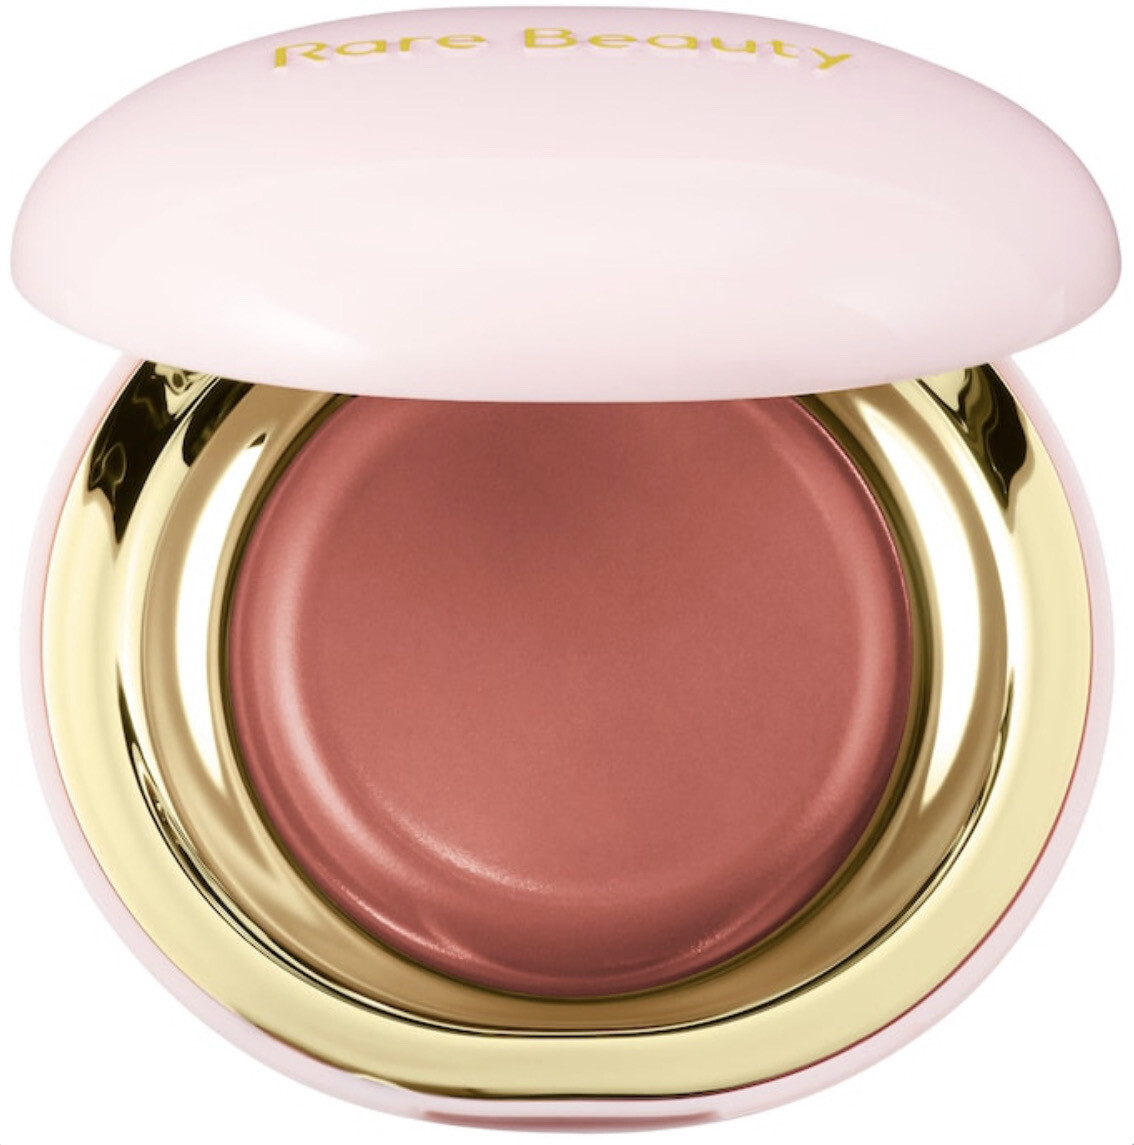 Rare Beauty - Stay Vulnerable Melting Cream Blush | Nearly Neutral - soft neutral pink